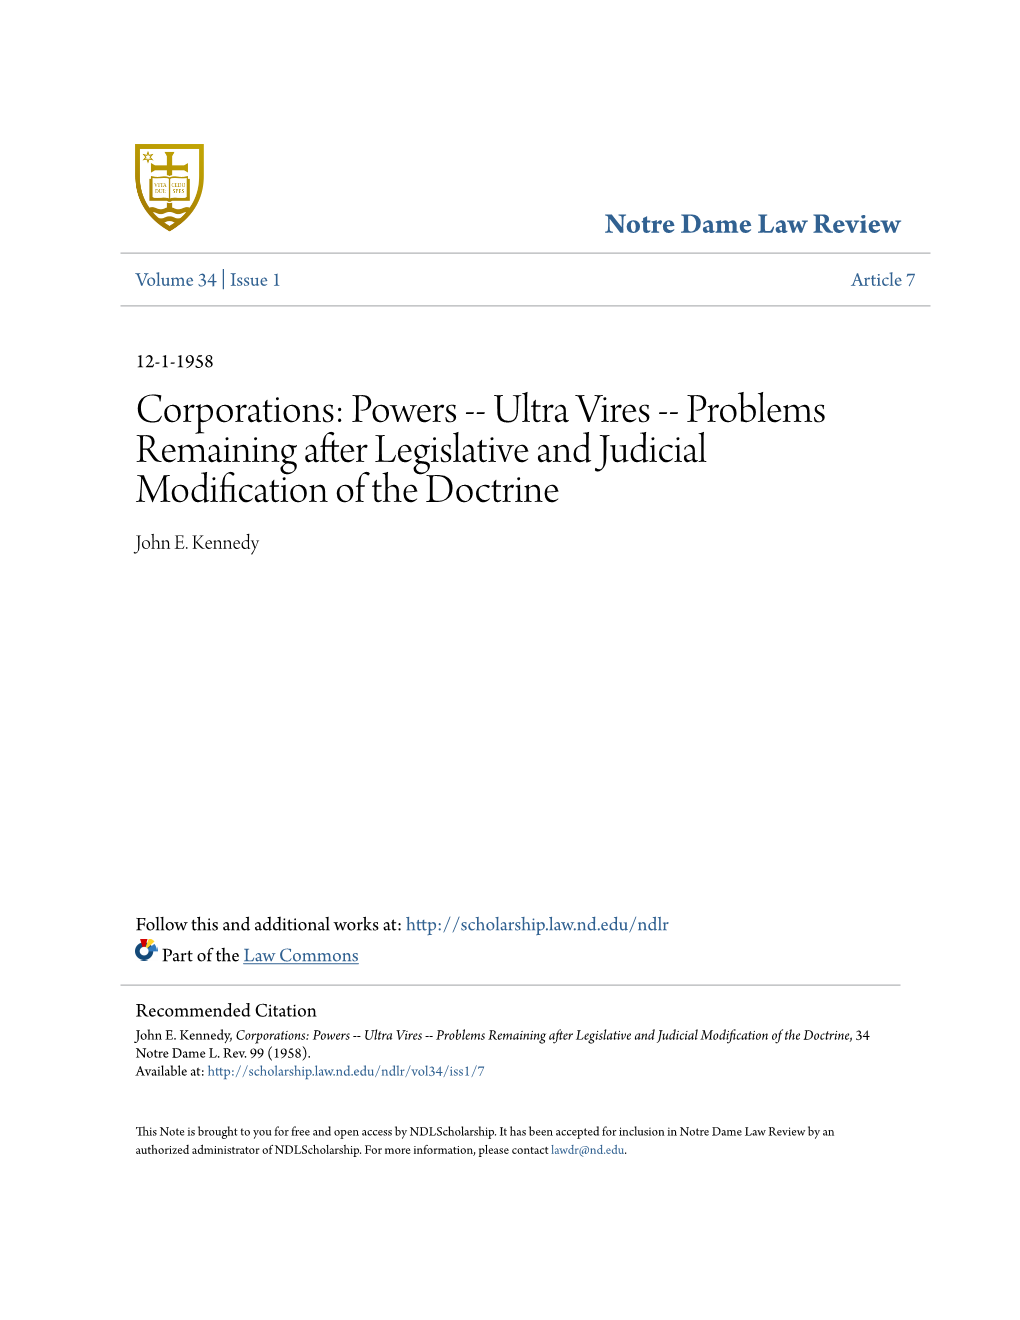 Corporations: Powers -- Ultra Vires -- Problems Remaining After Legislative and Judicial Modification of the Doctrine John E